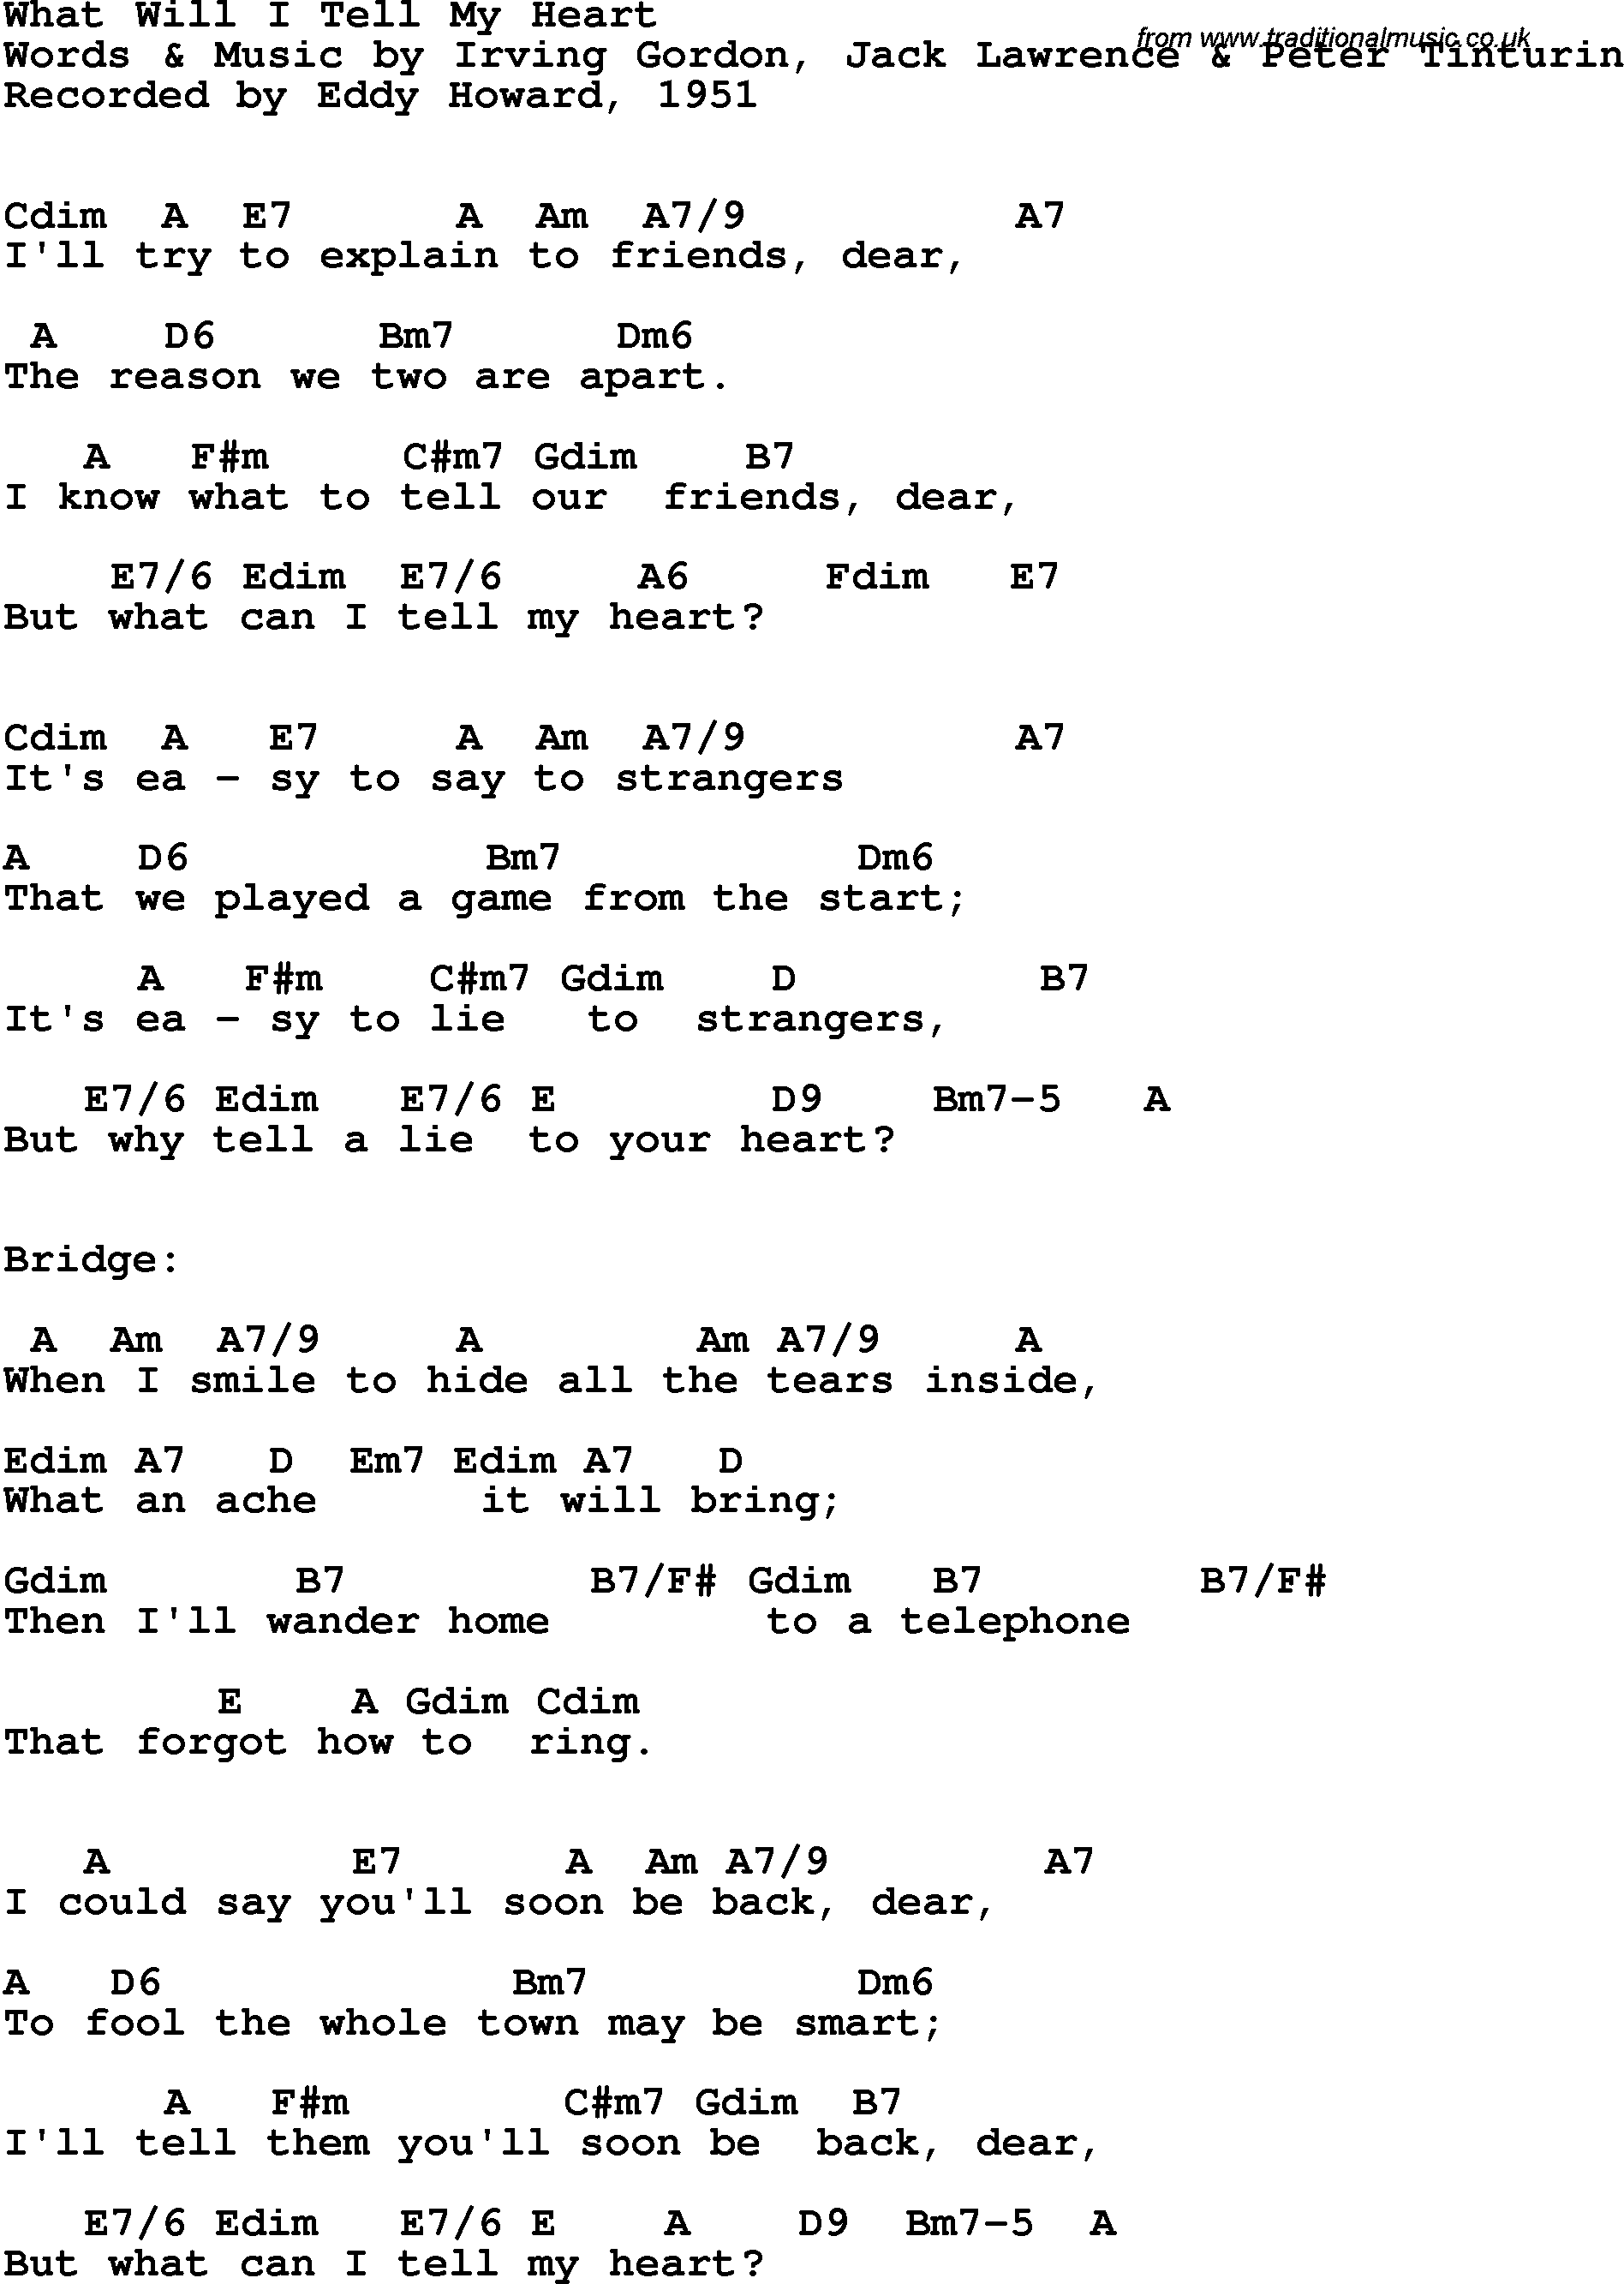 Song Lyrics with guitar chords for What Will I Tell My Heart - Eddy Howard, 1951